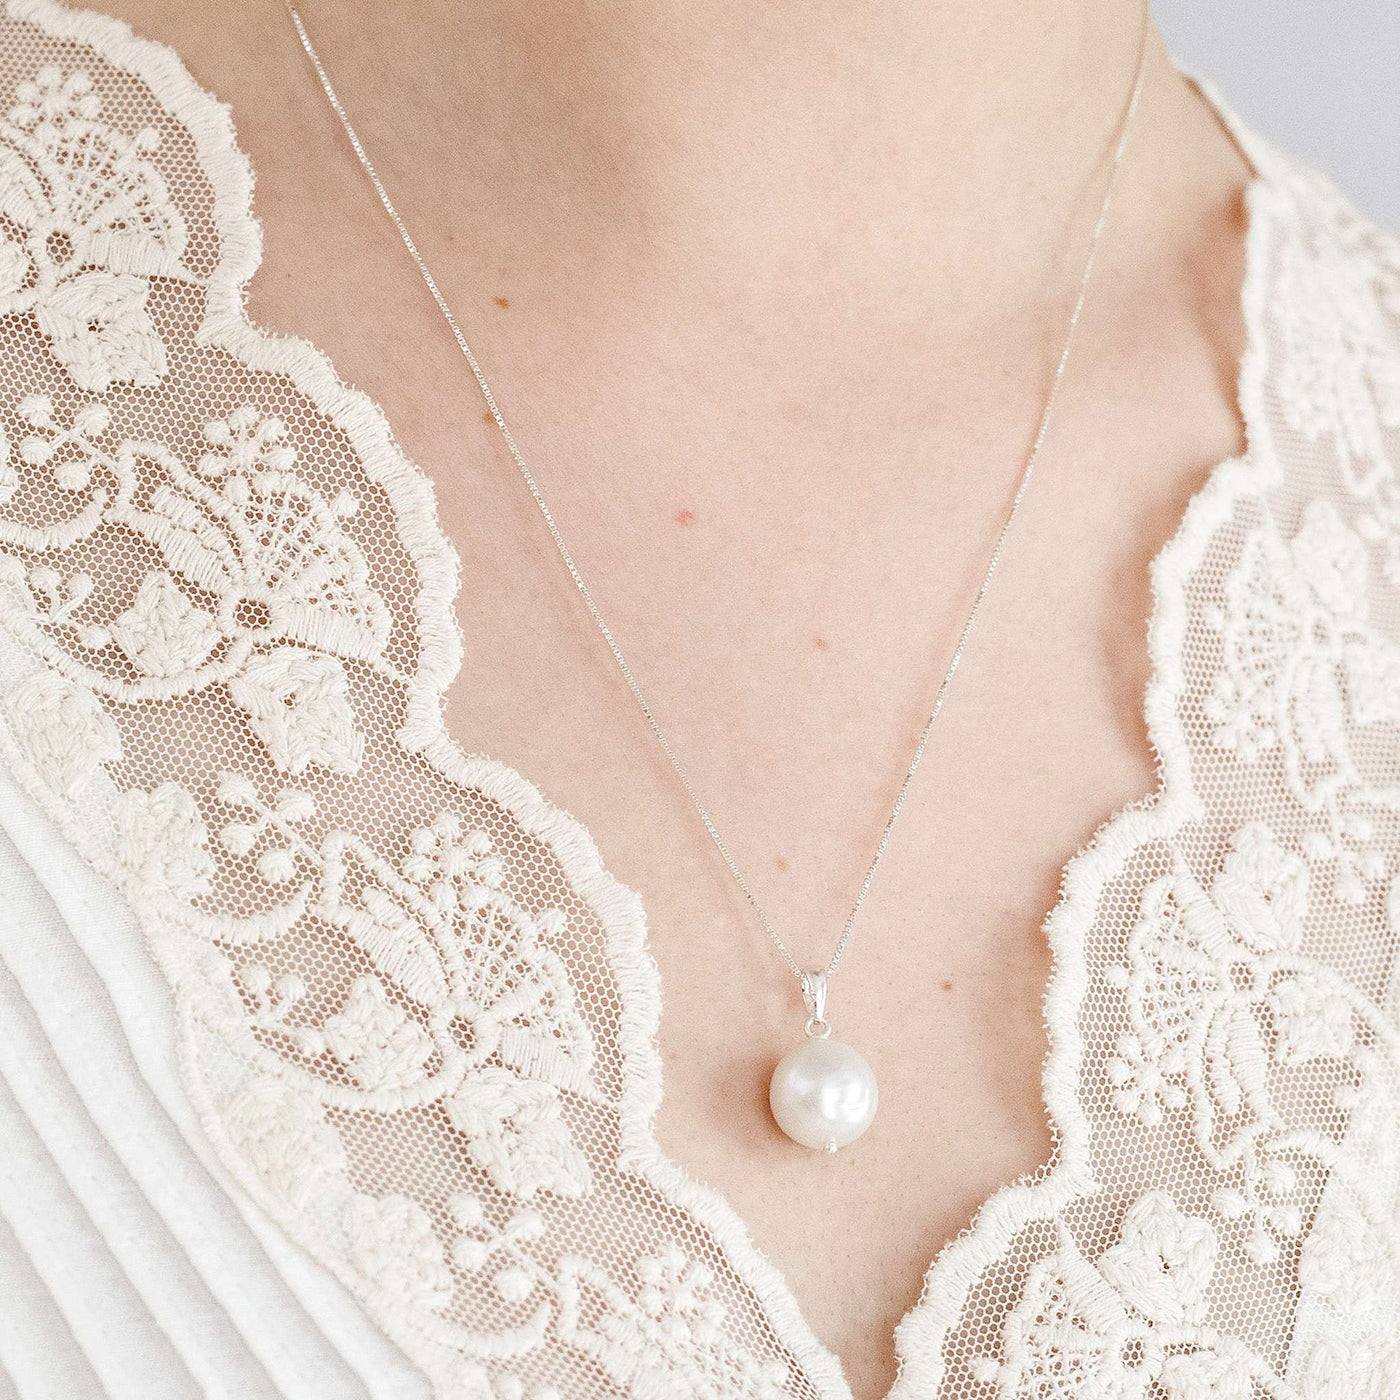 FILICUDI // Necklace in silver with baroque pearl // Special Price (regular 62€)